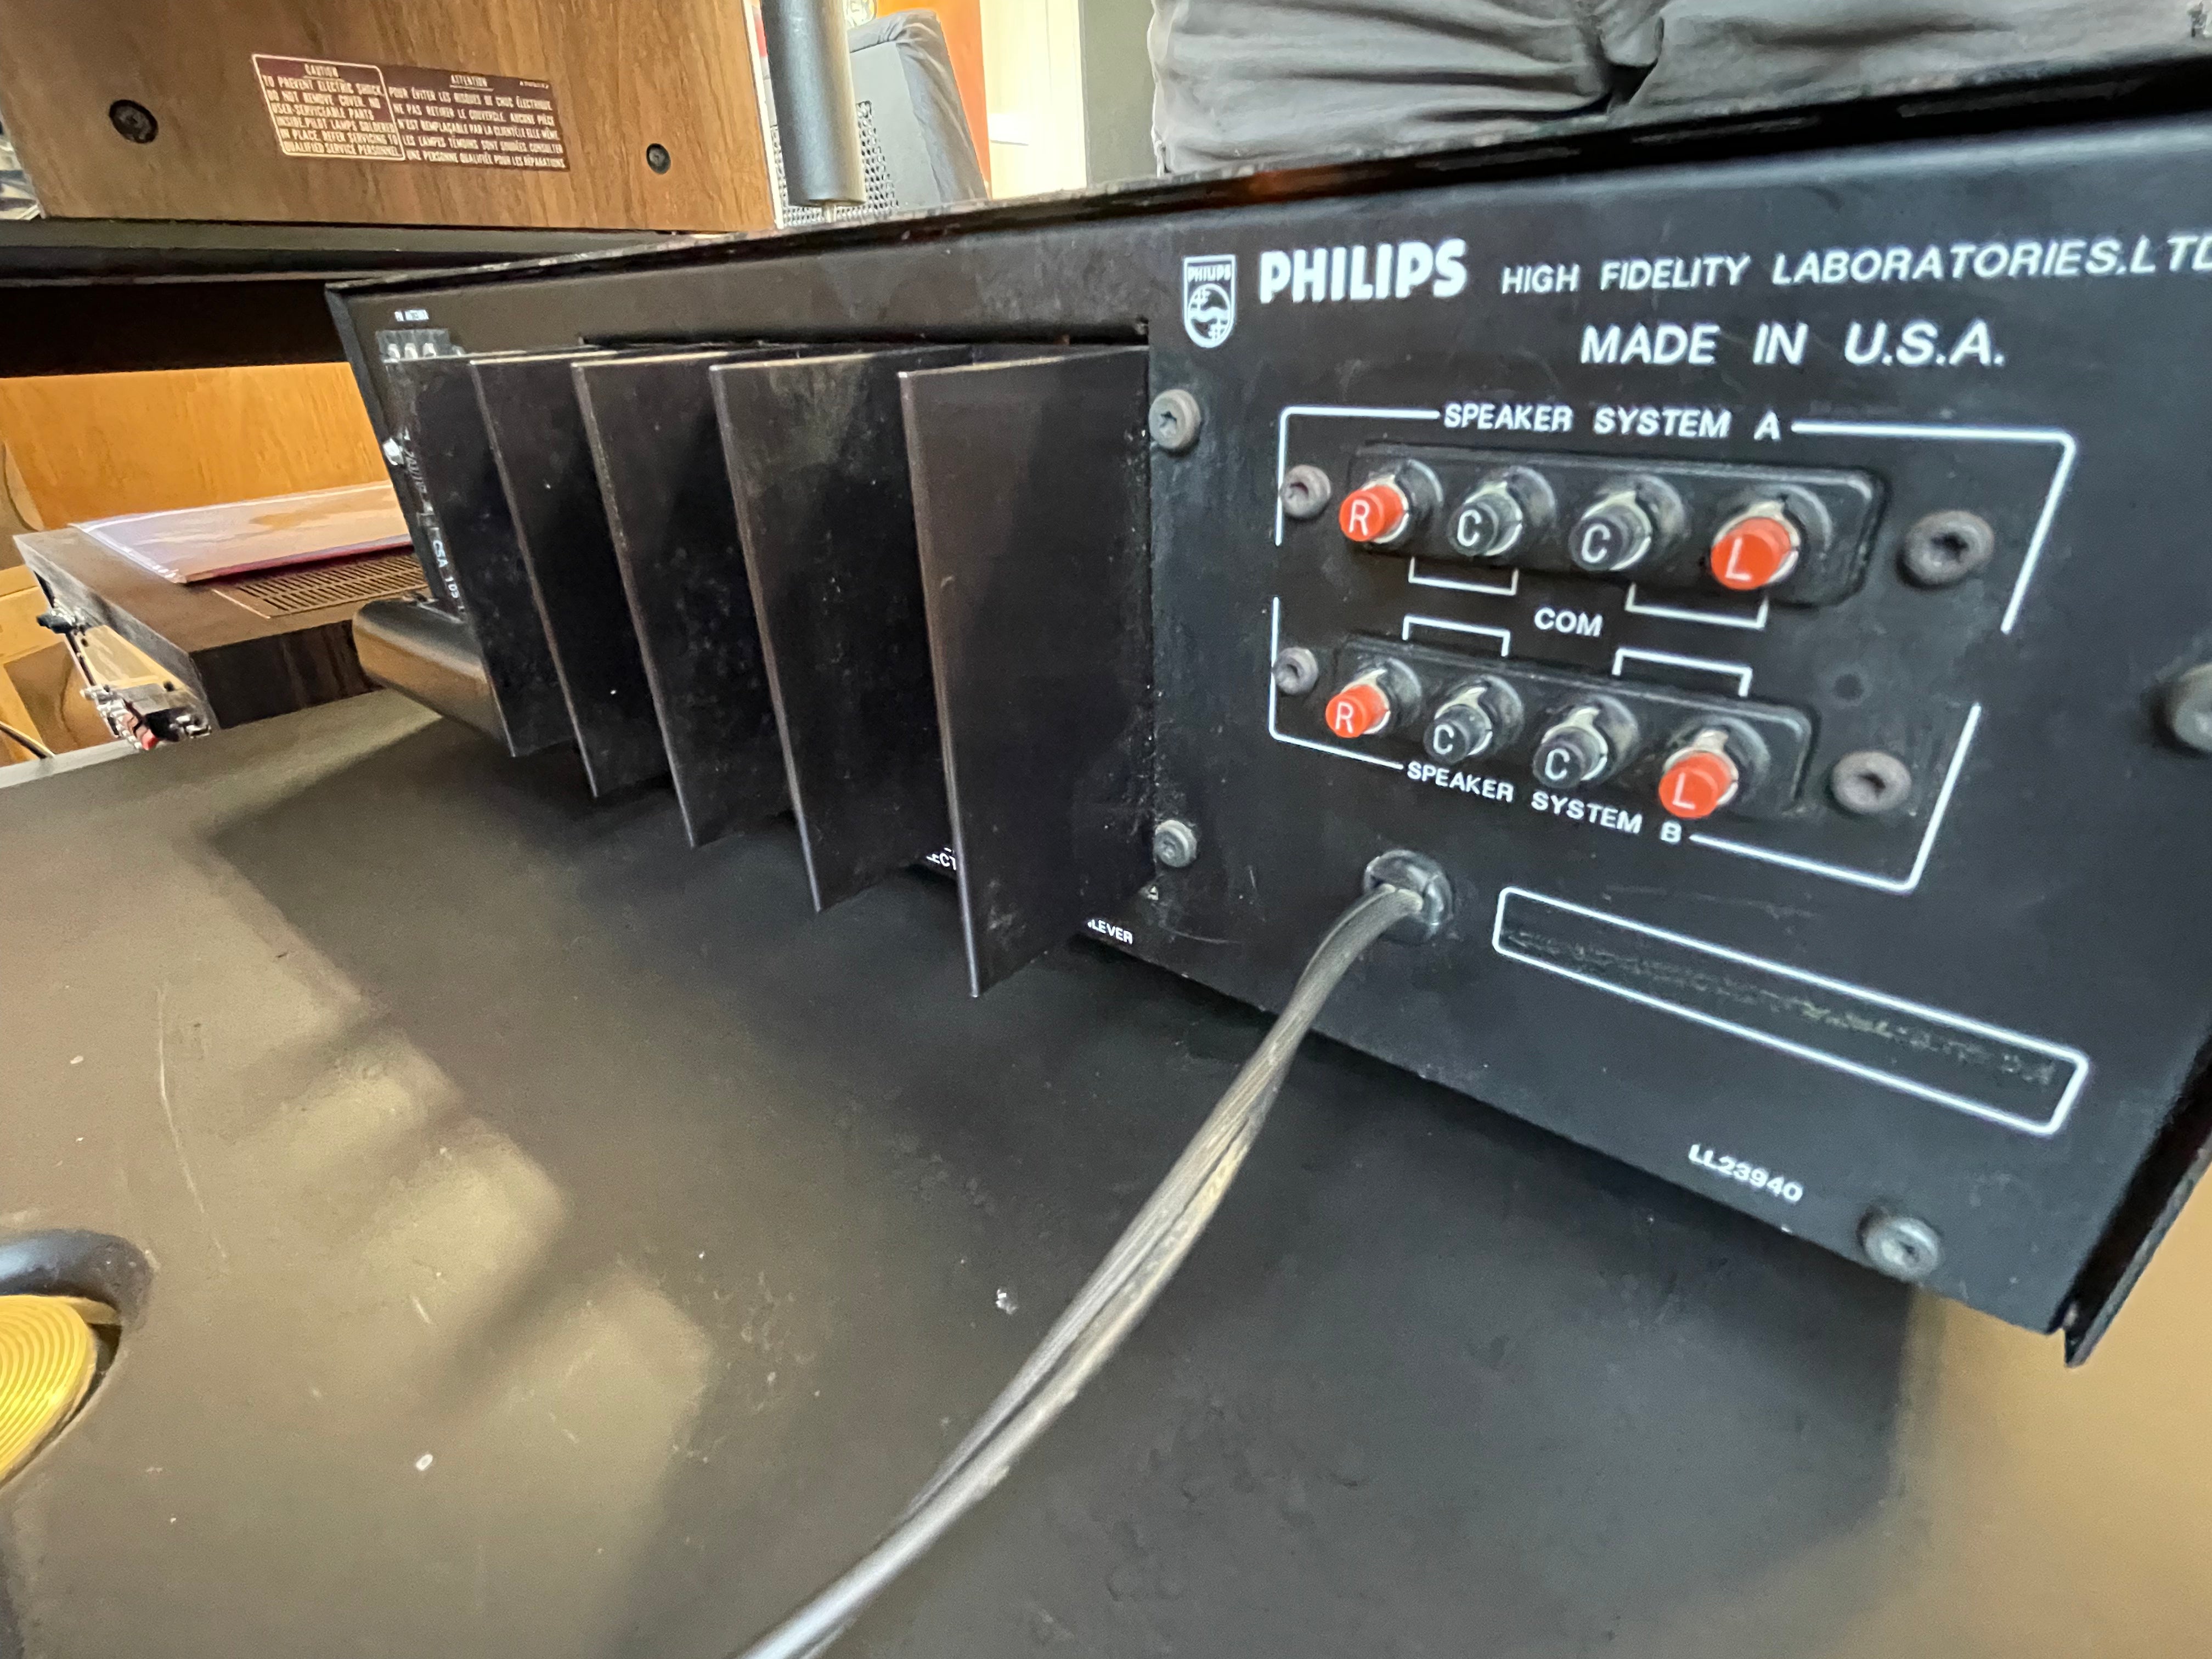 Philips High Fidelity Laboratories 7831 Receiver - SOLD